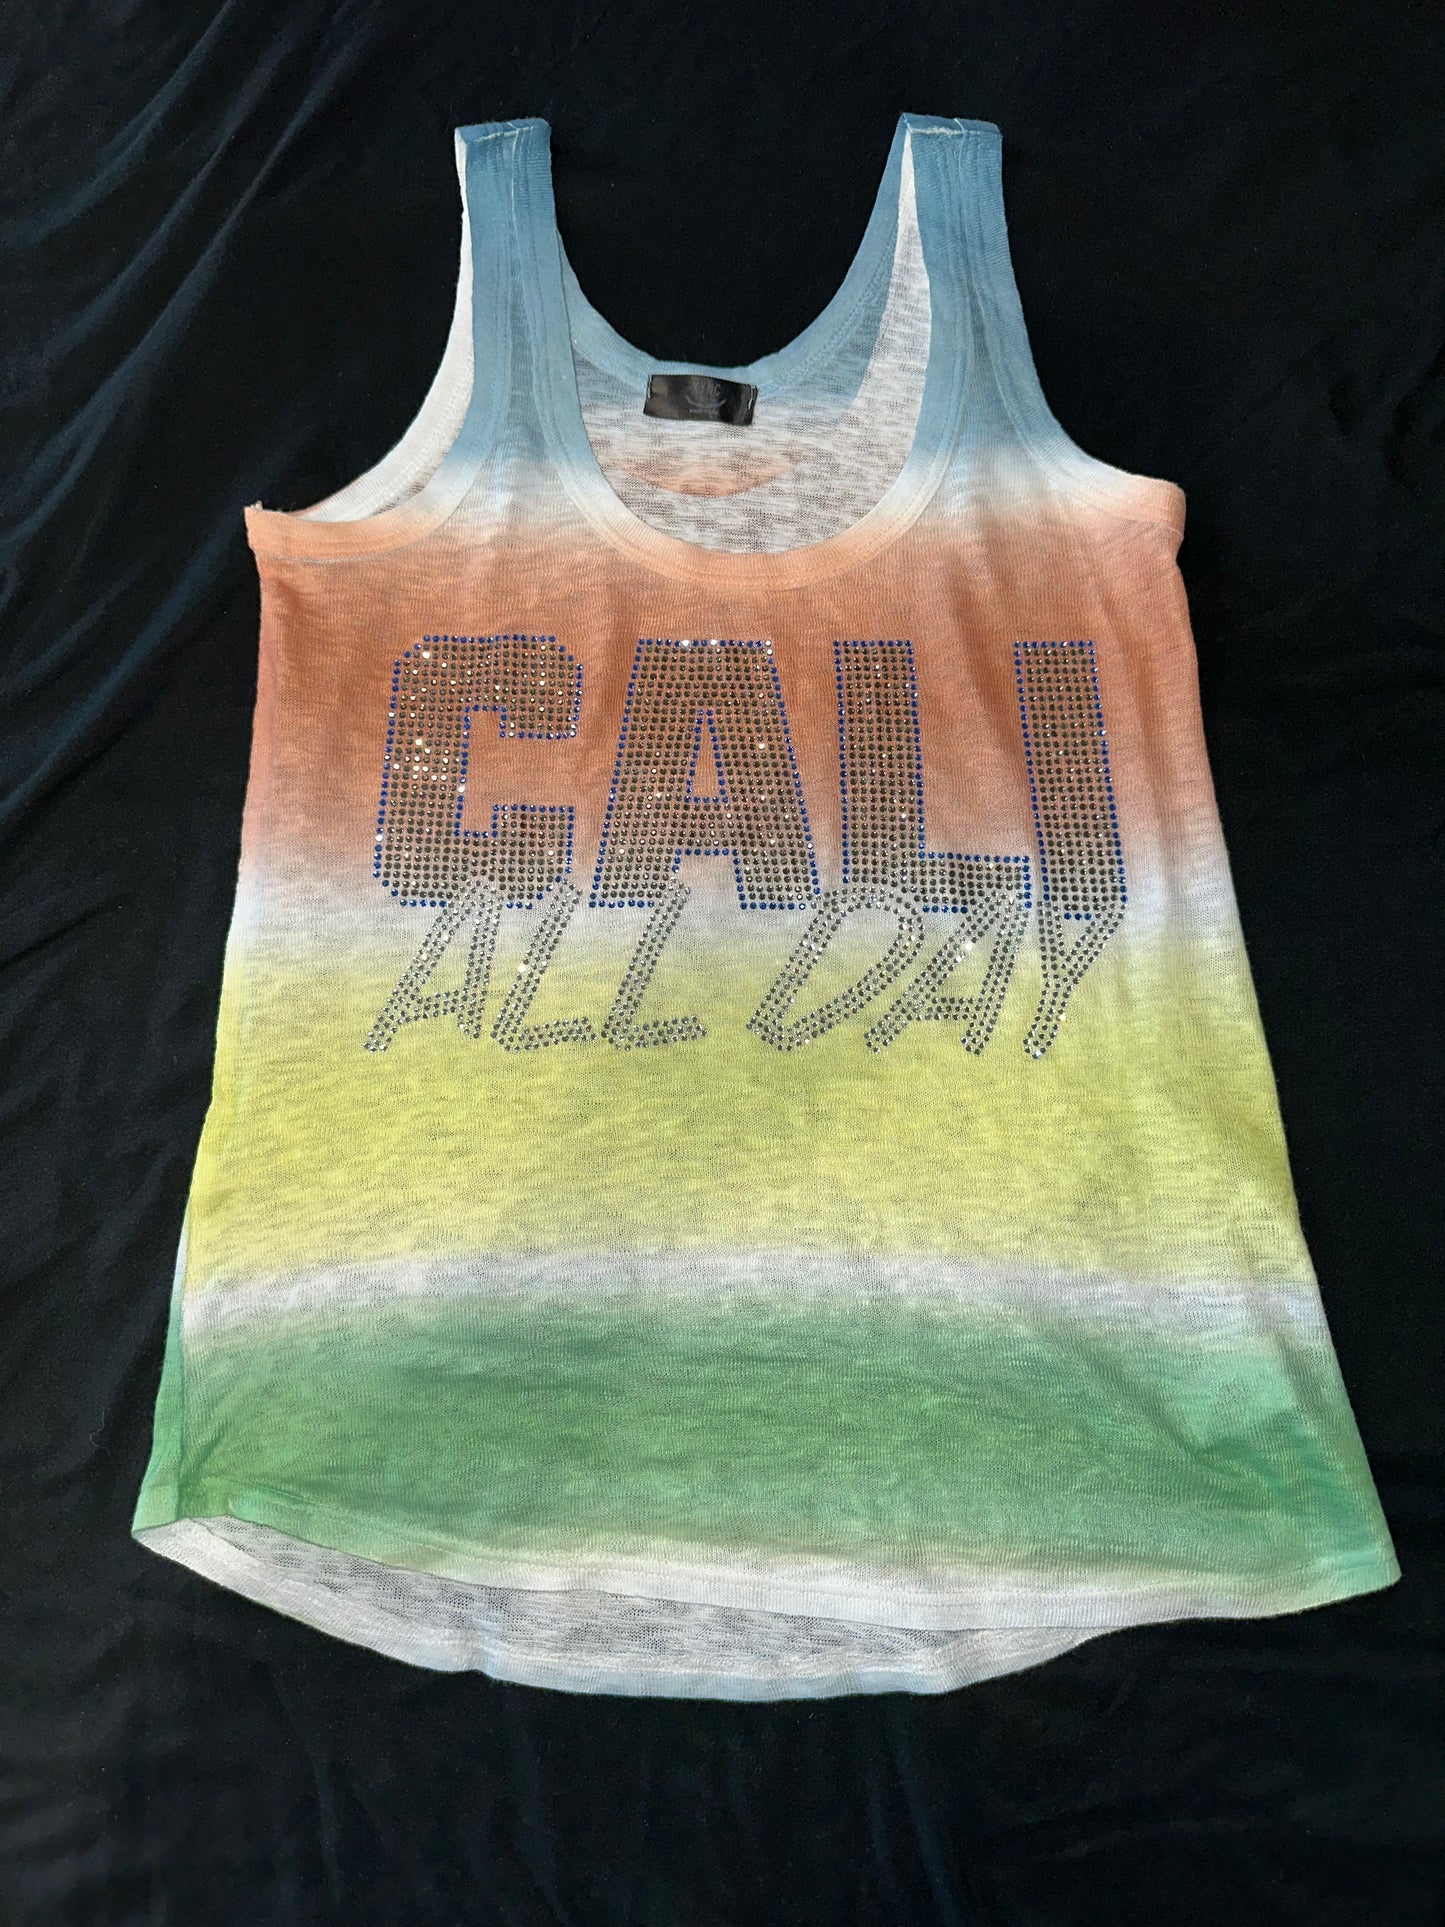 Dip-Dye Bling Tank top with CALI ALL DAY design (Midnight)